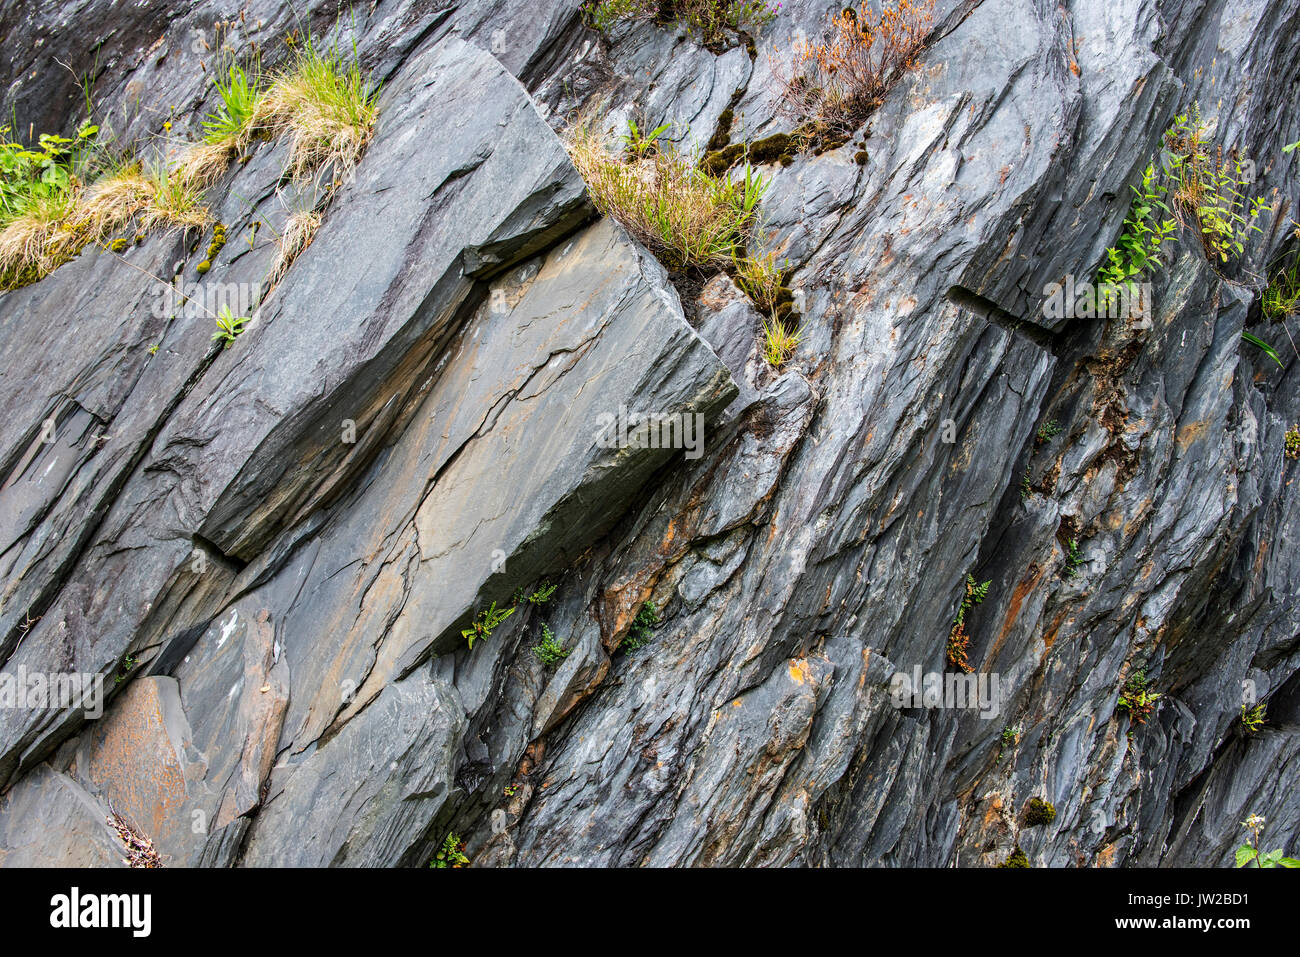 https://c8.alamy.com/comp/JW2BD1/rock-layers-in-cliff-made-of-slate-at-the-ballachulish-slate-quarry-JW2BD1.jpg